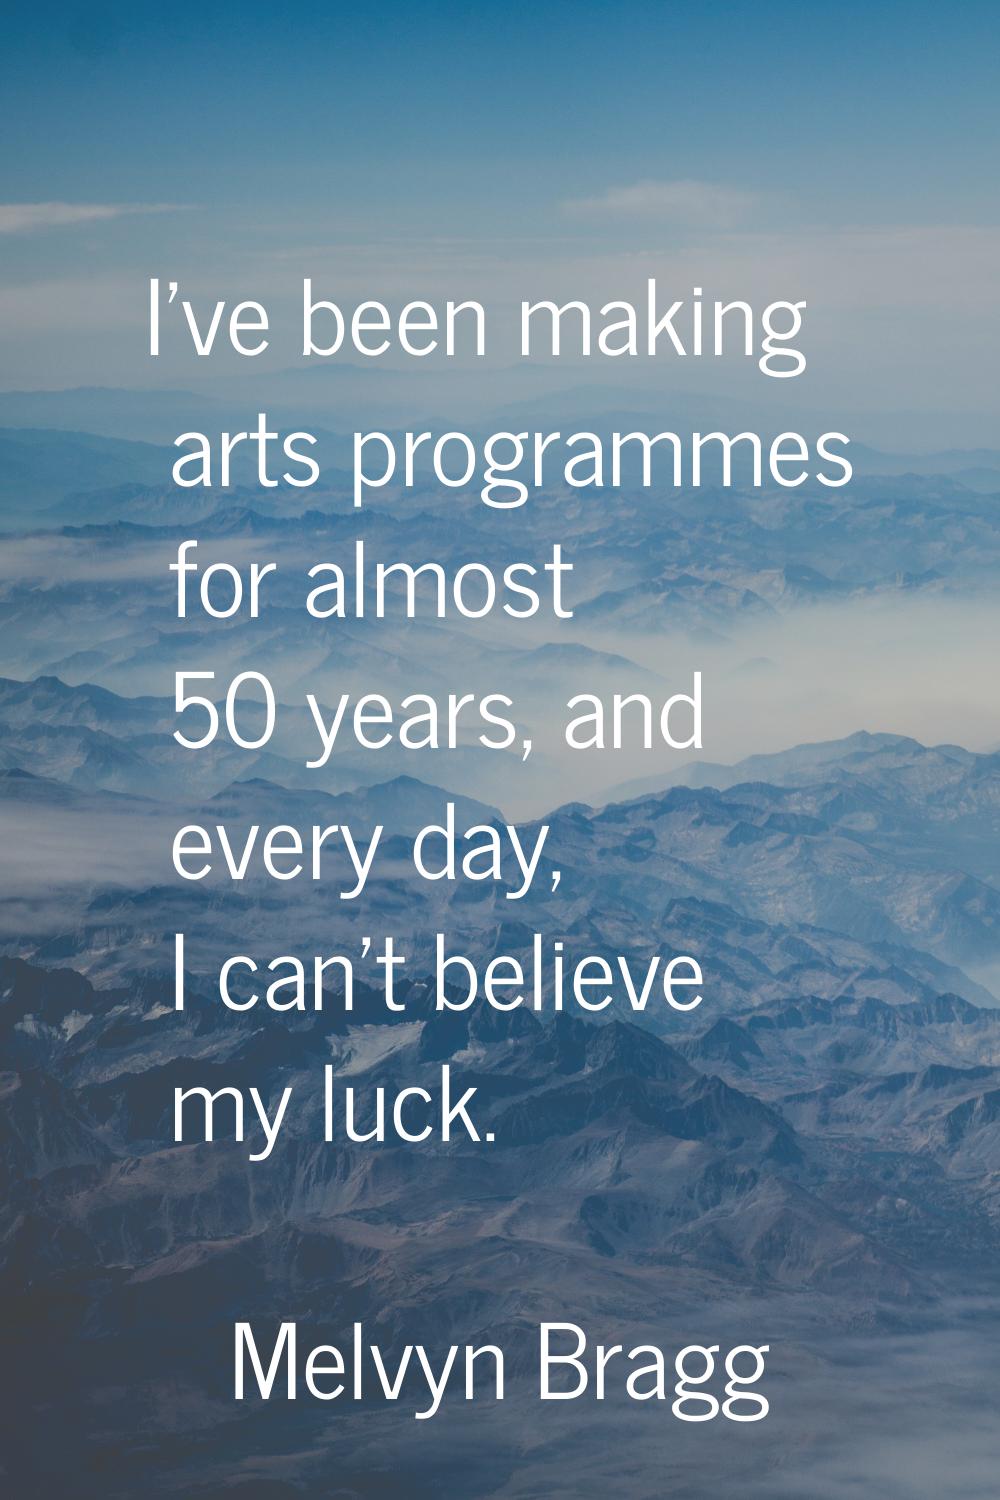 I've been making arts programmes for almost 50 years, and every day, I can't believe my luck.